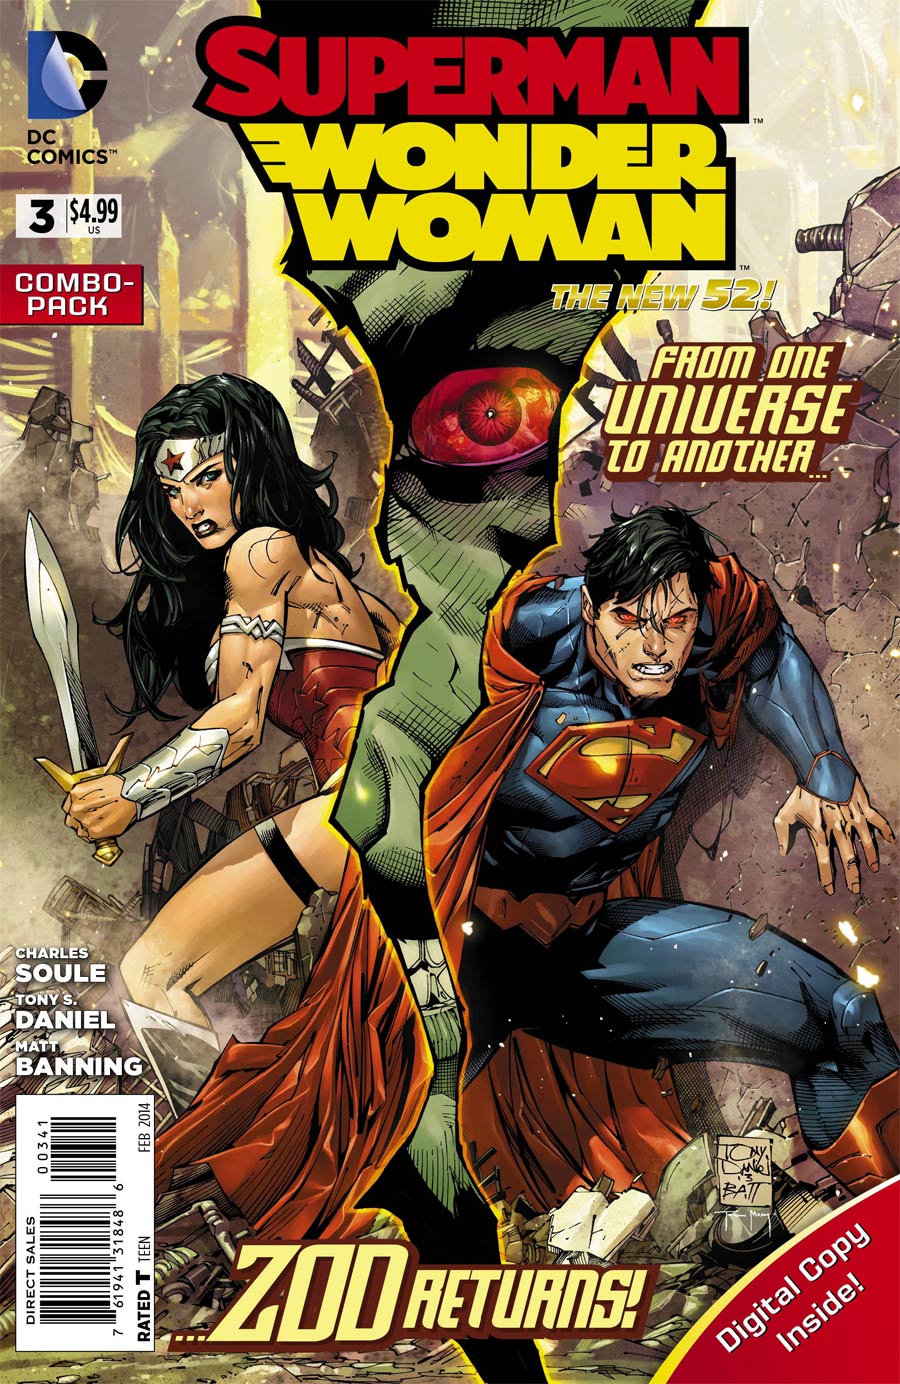 Superman Wonder Woman #3 Cover C Combo Pack Without Polybag